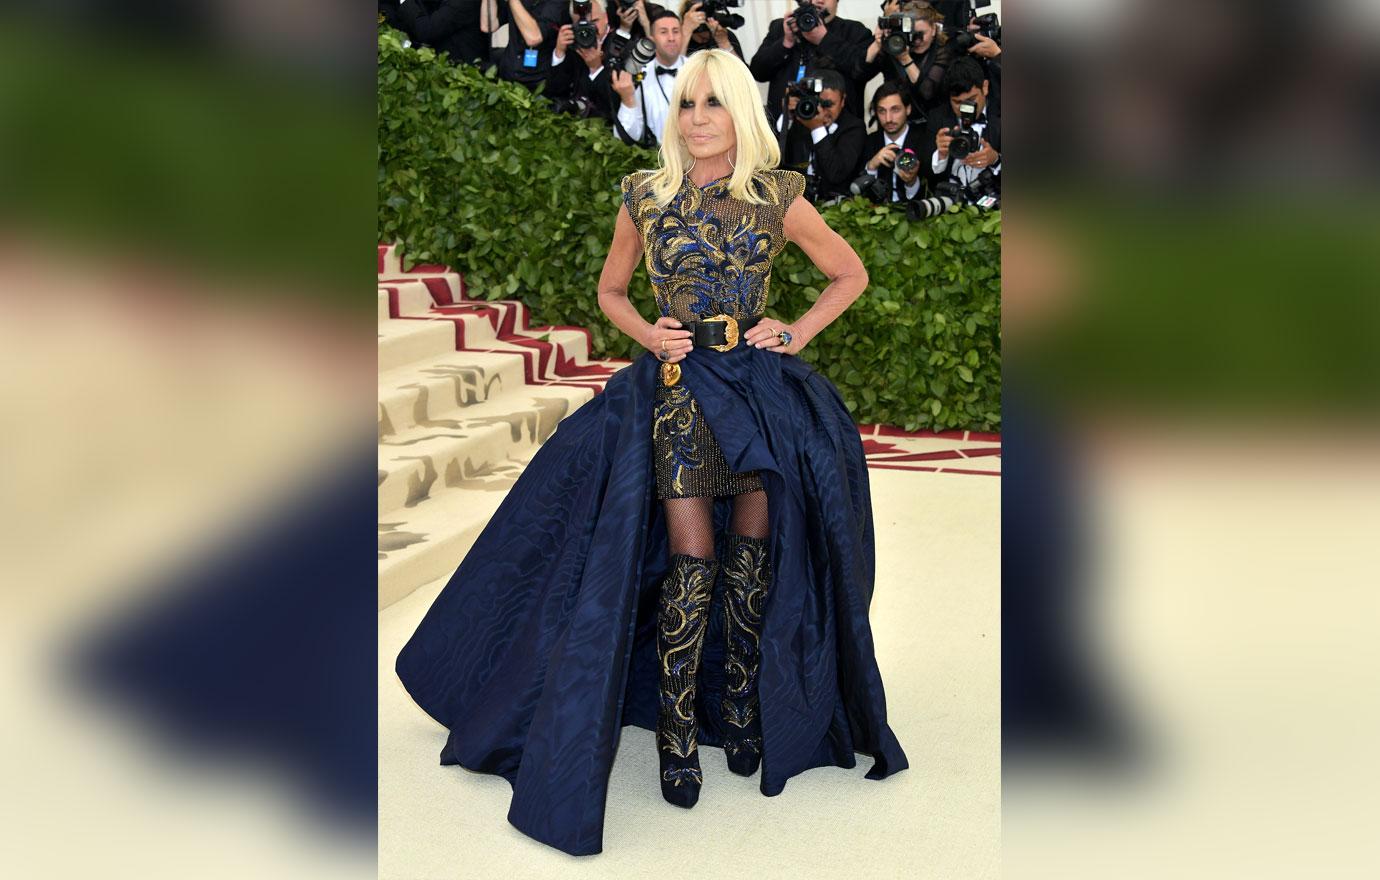 Donatella Versace on her red carpet 'angels' Kim Kardashian and Katy Perry  at the Met Gala 2018